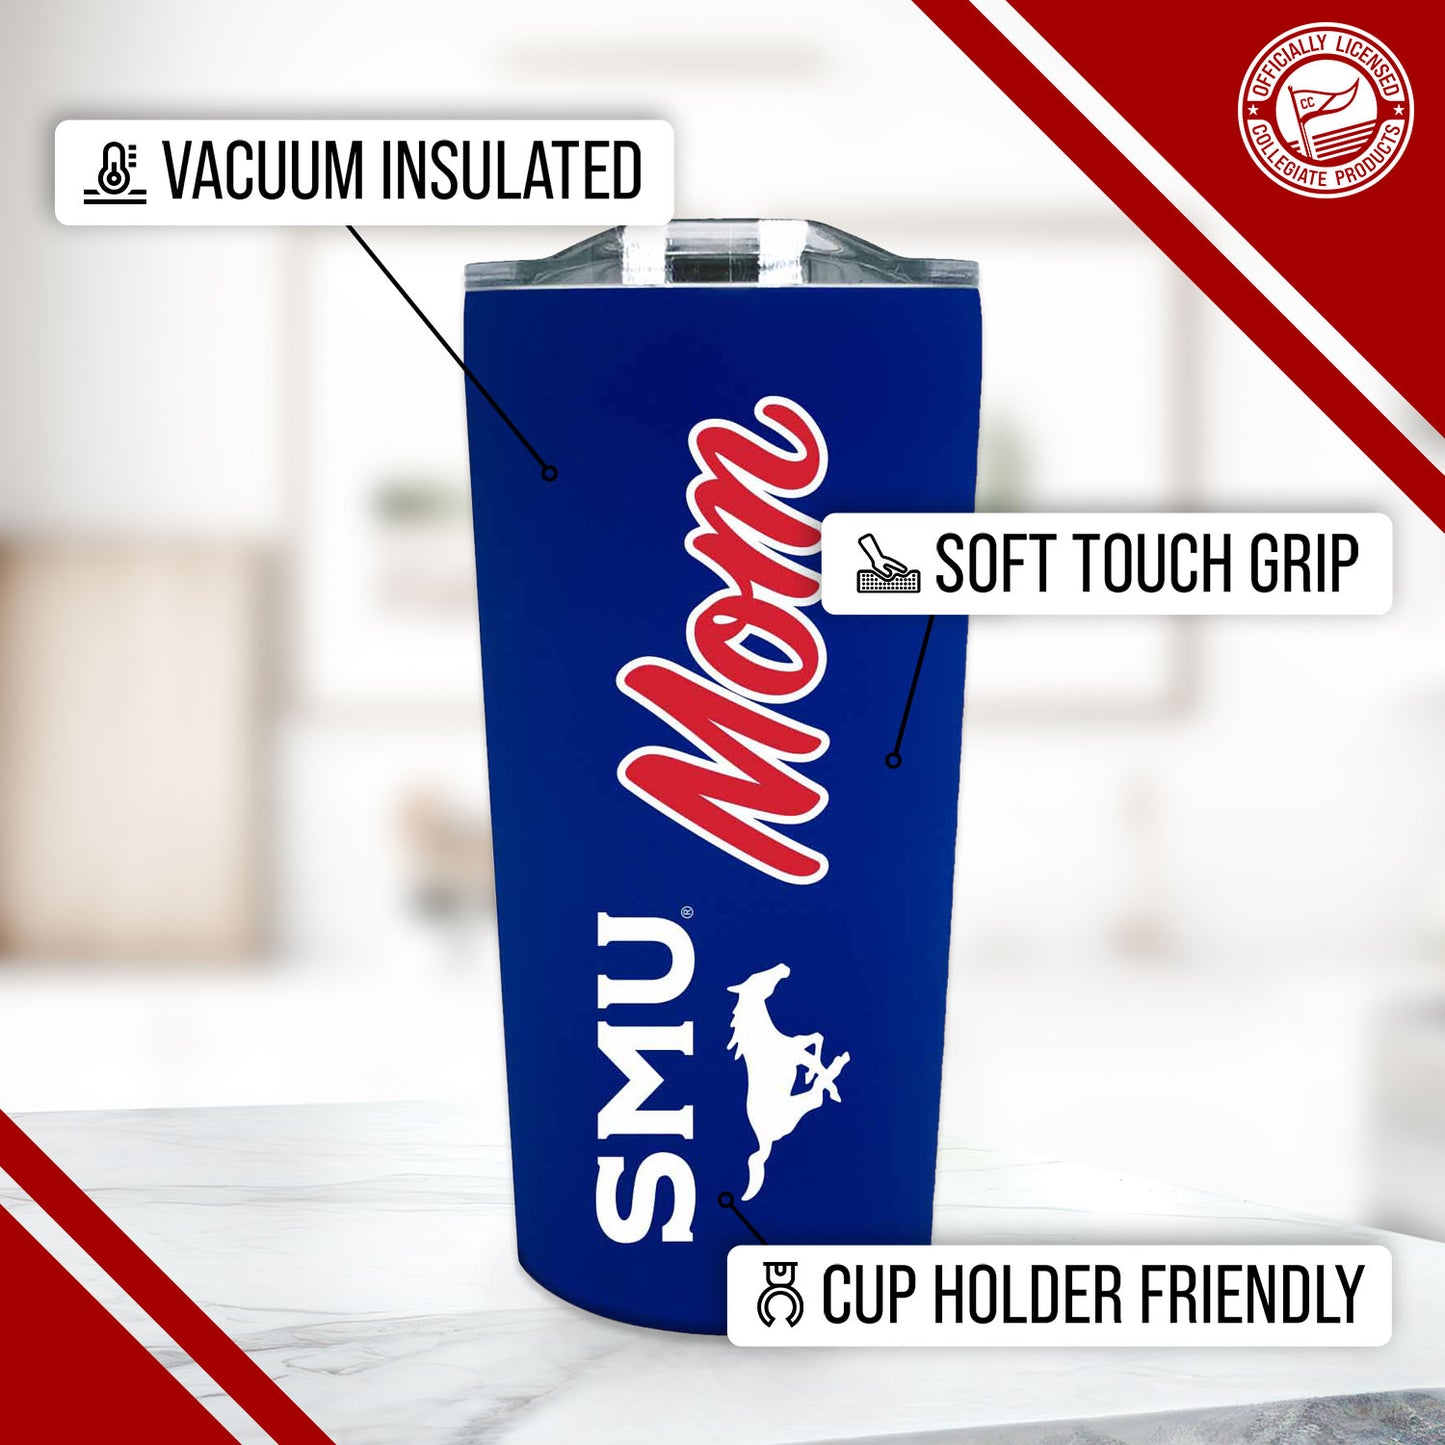 SMU Mustangs NCAA Stainless Steel Travel Tumbler for Mom - Royal